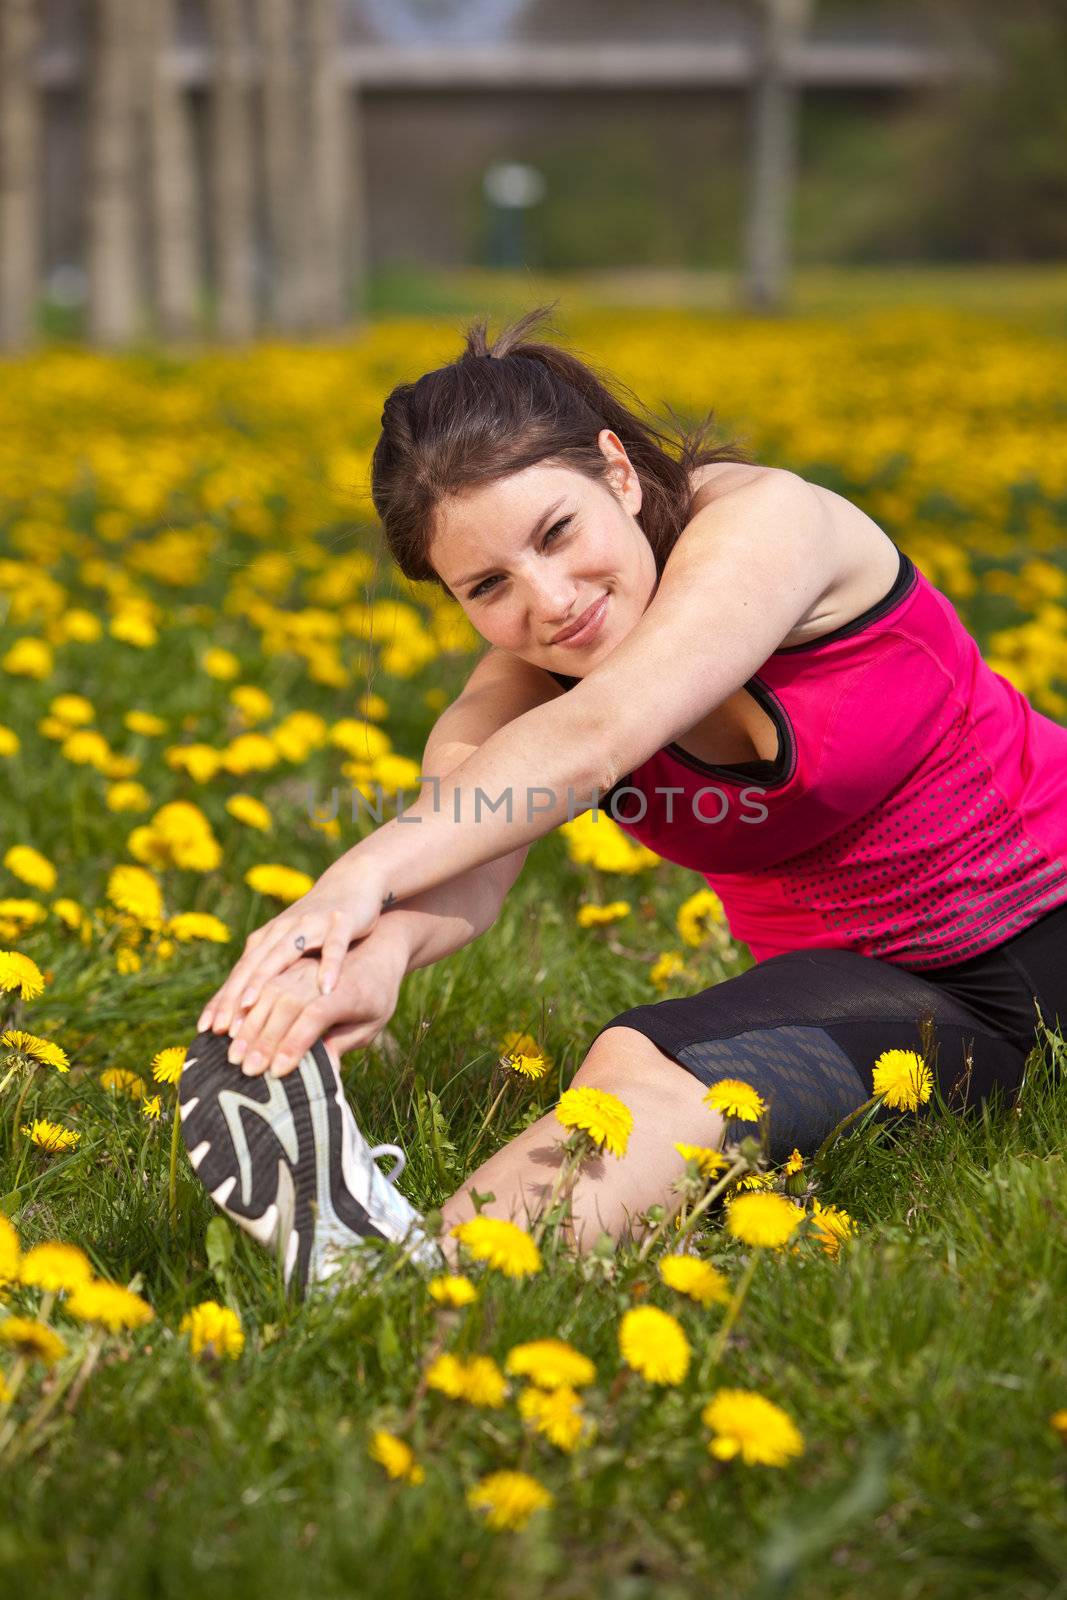 Pretty young woman doing stretch exercises in a field of dandelions